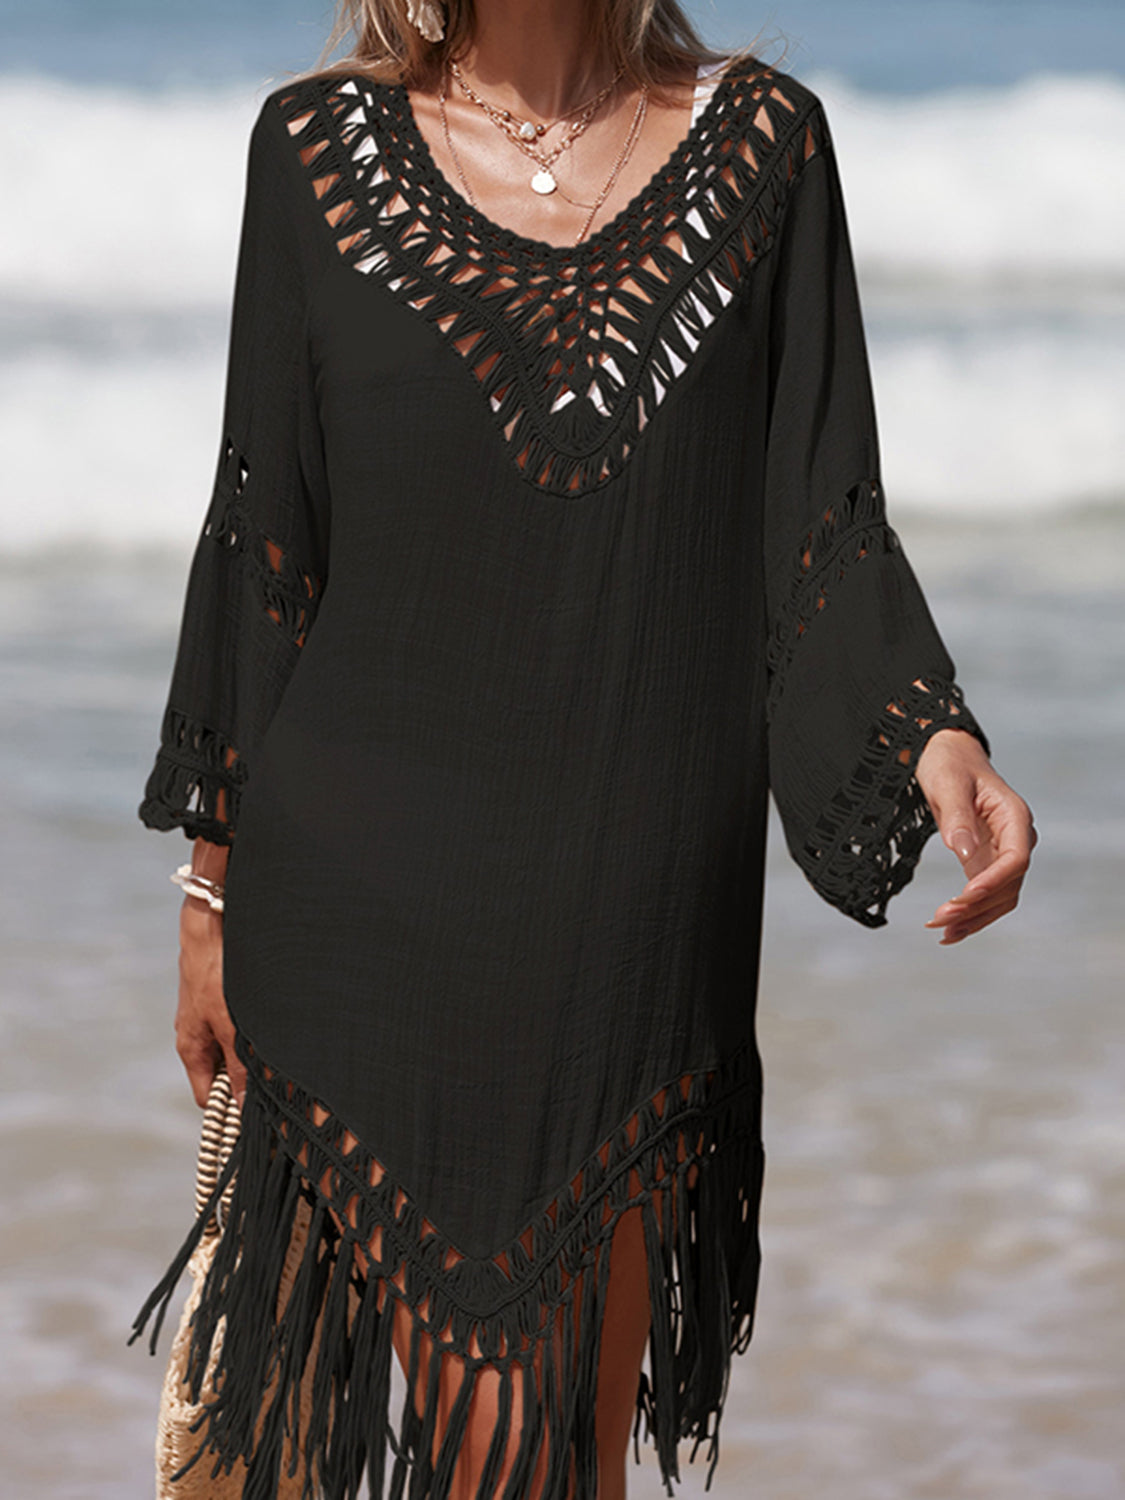 Cutout Fringe Scoop Neck Cover-Up Black One Size